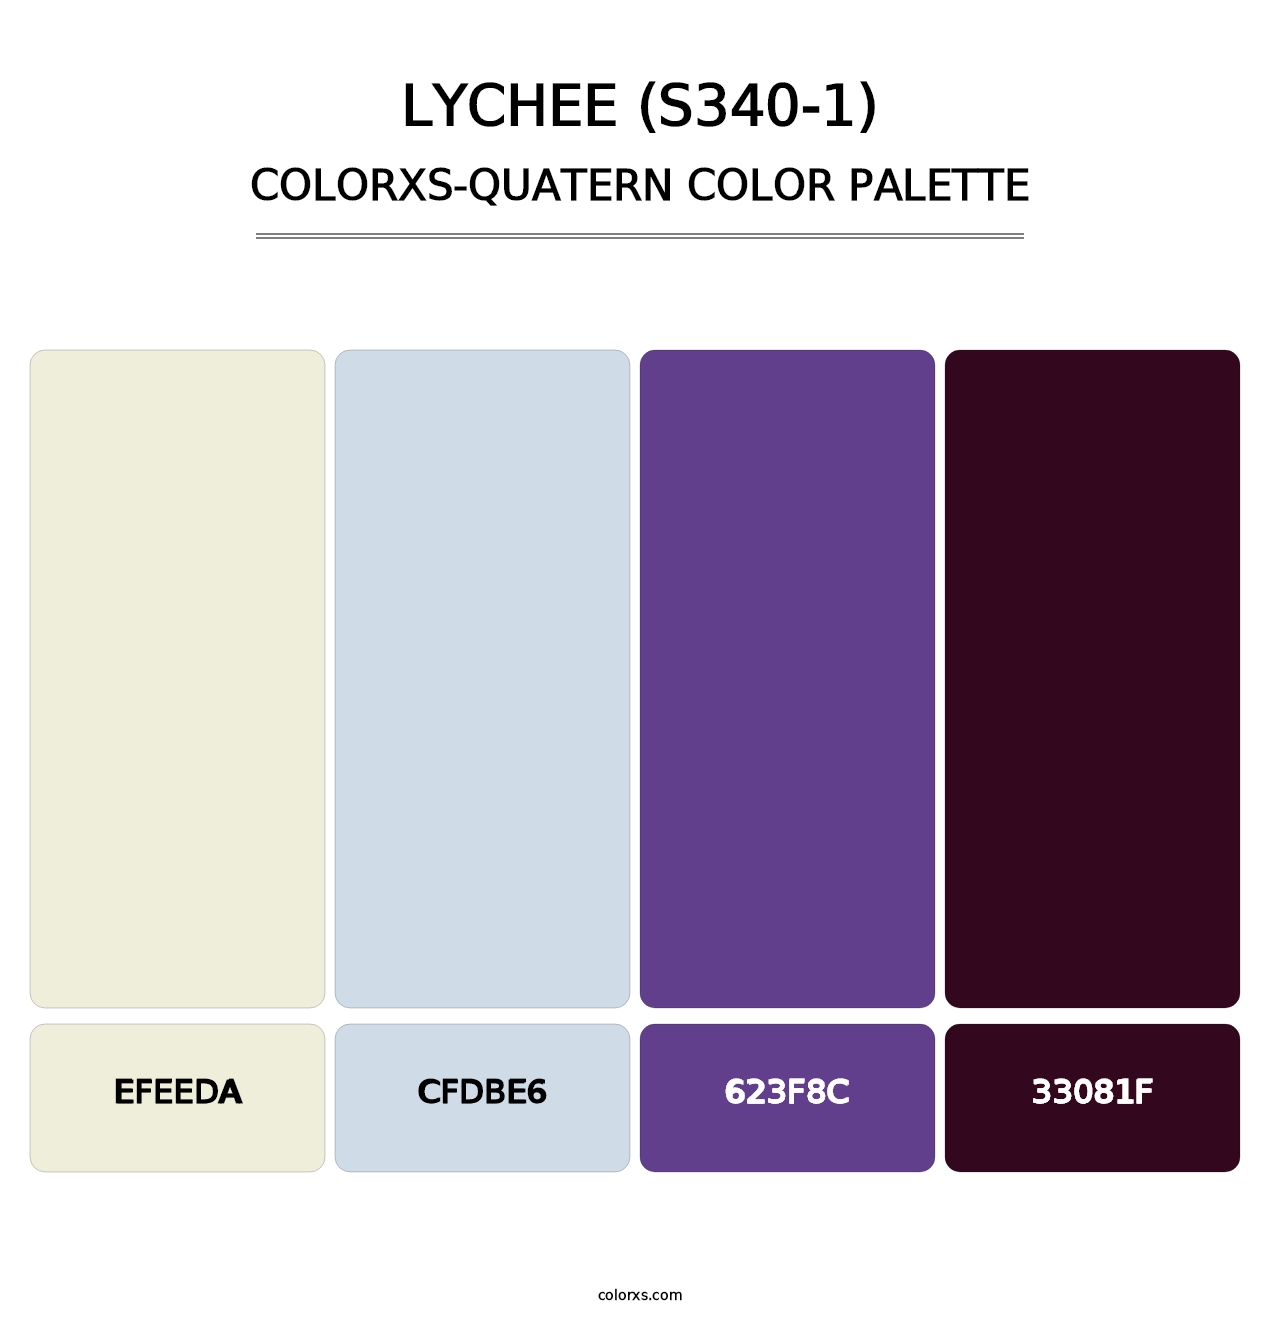 Lychee (S340-1) - Colorxs Quatern Palette